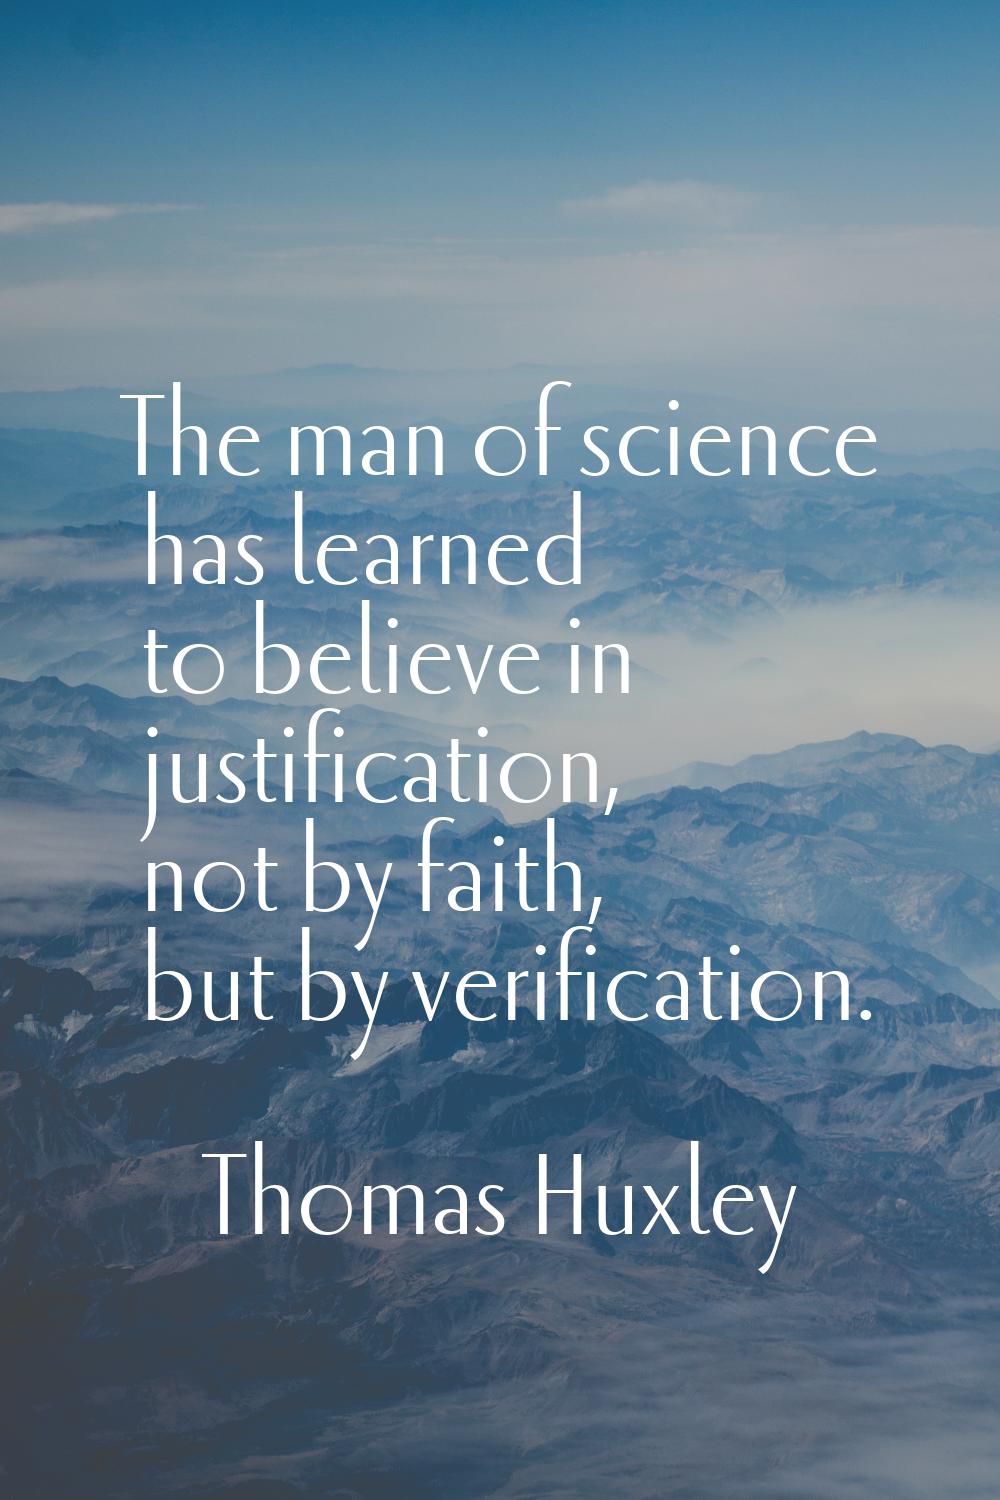 The man of science has learned to believe in justification, not by faith, but by verification.